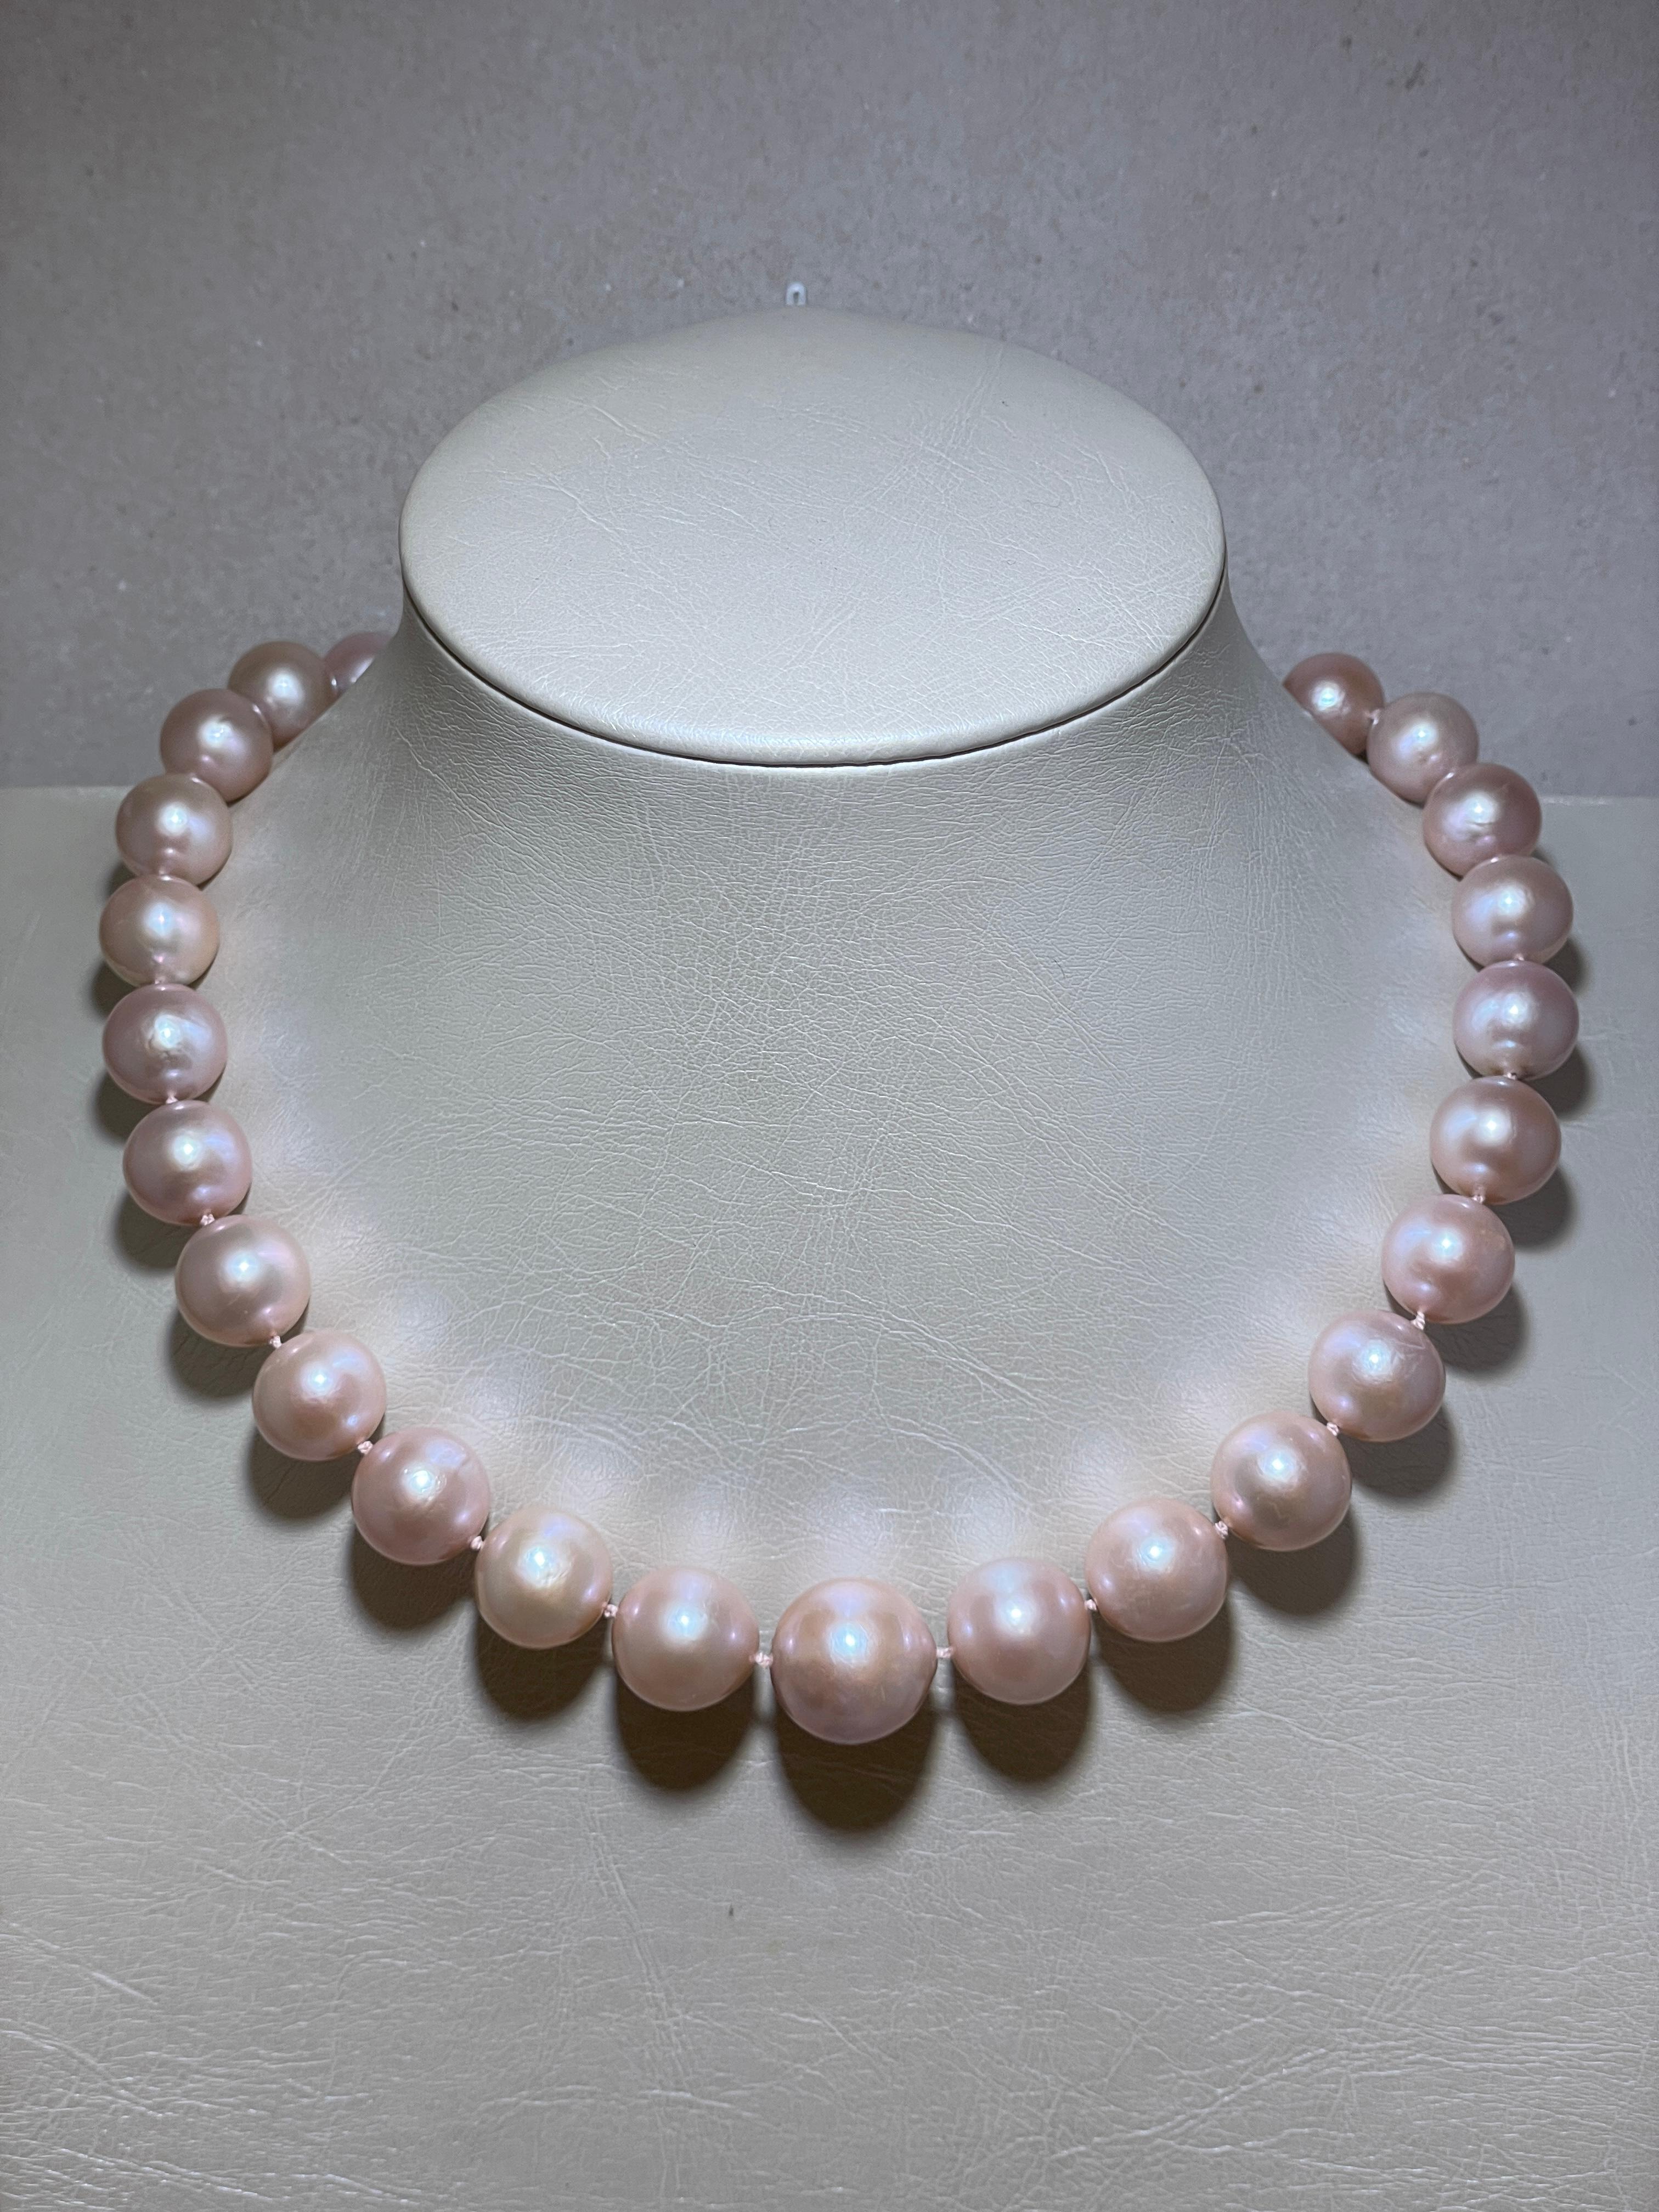 This rose-colored freshwater pearl necklace consists of 31 pearls ranging from 16 to 11.8mm. It has a beautiful luster and can be fastened with an 18kt white gold bayonet clasp. 

The length measures 46cm
 Weighs 102.8 grams